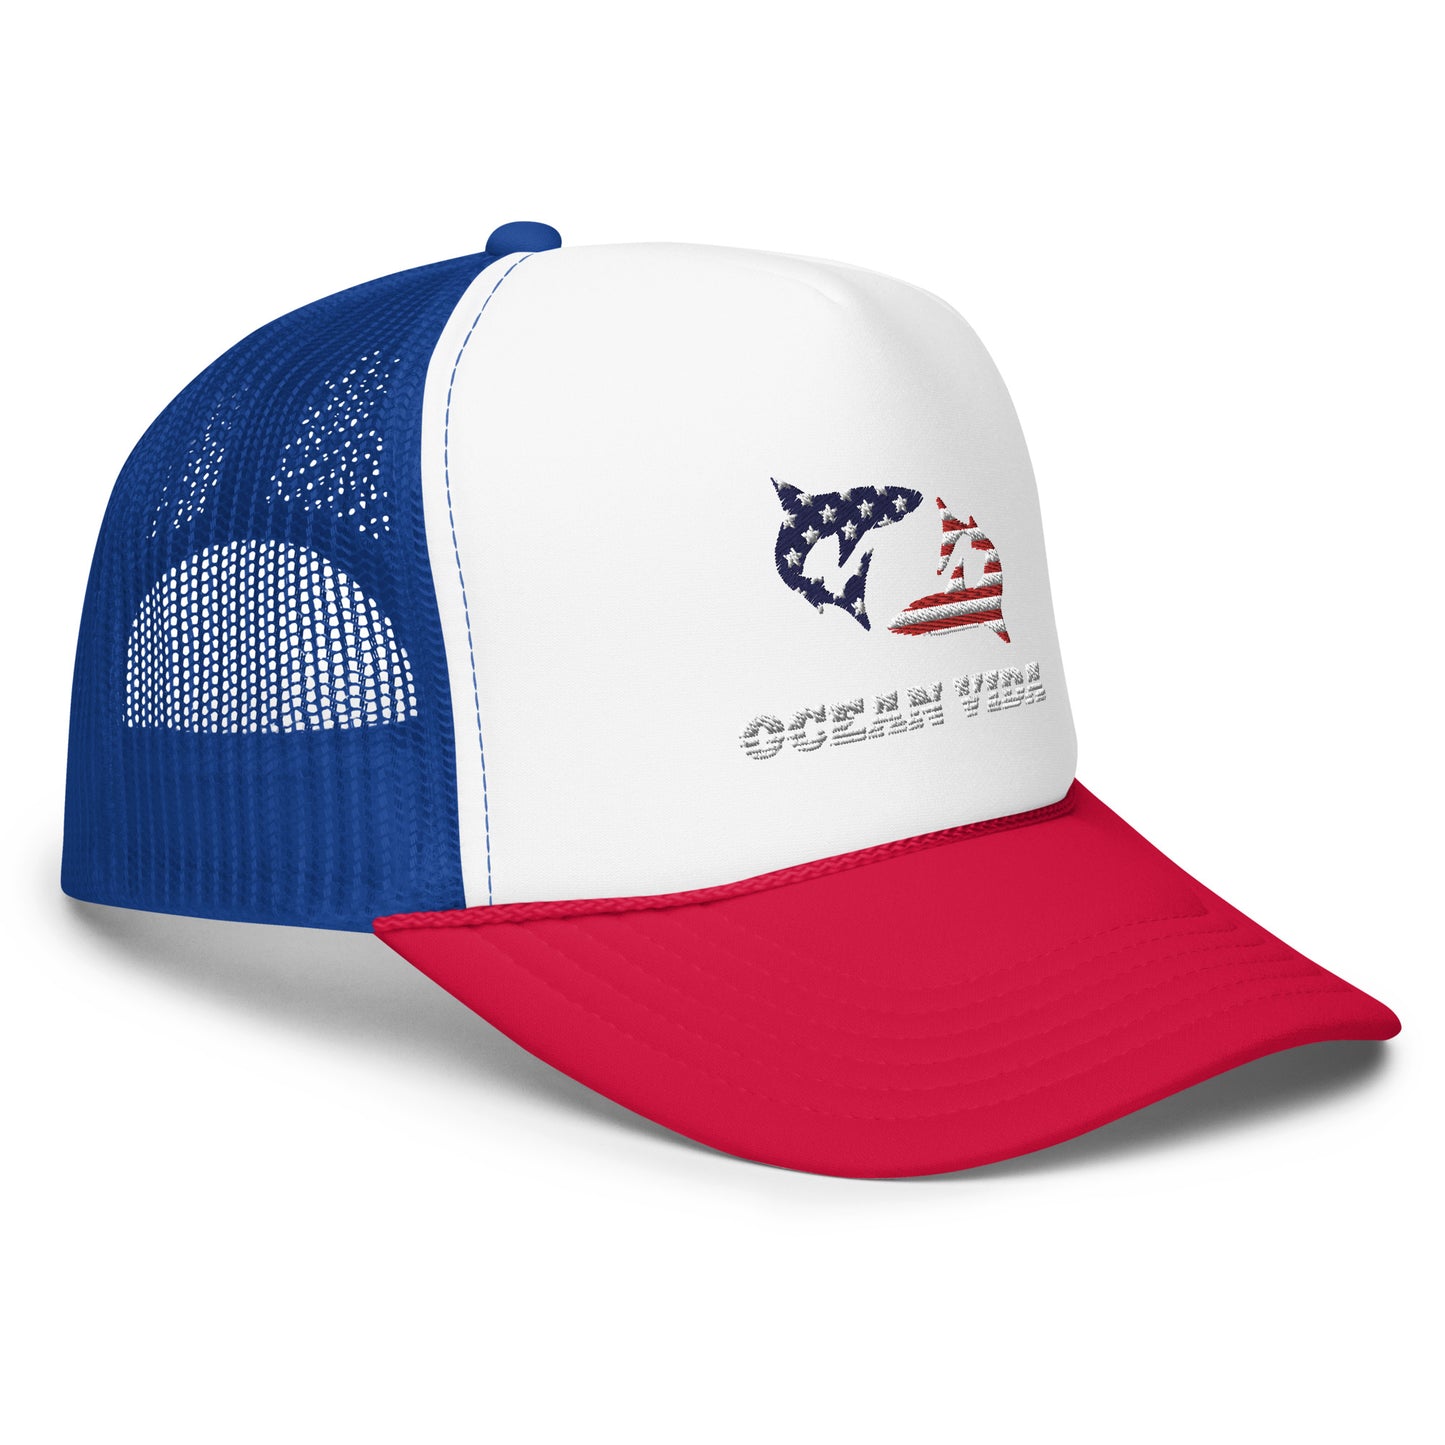 Red White and Blue Foam trucker hat